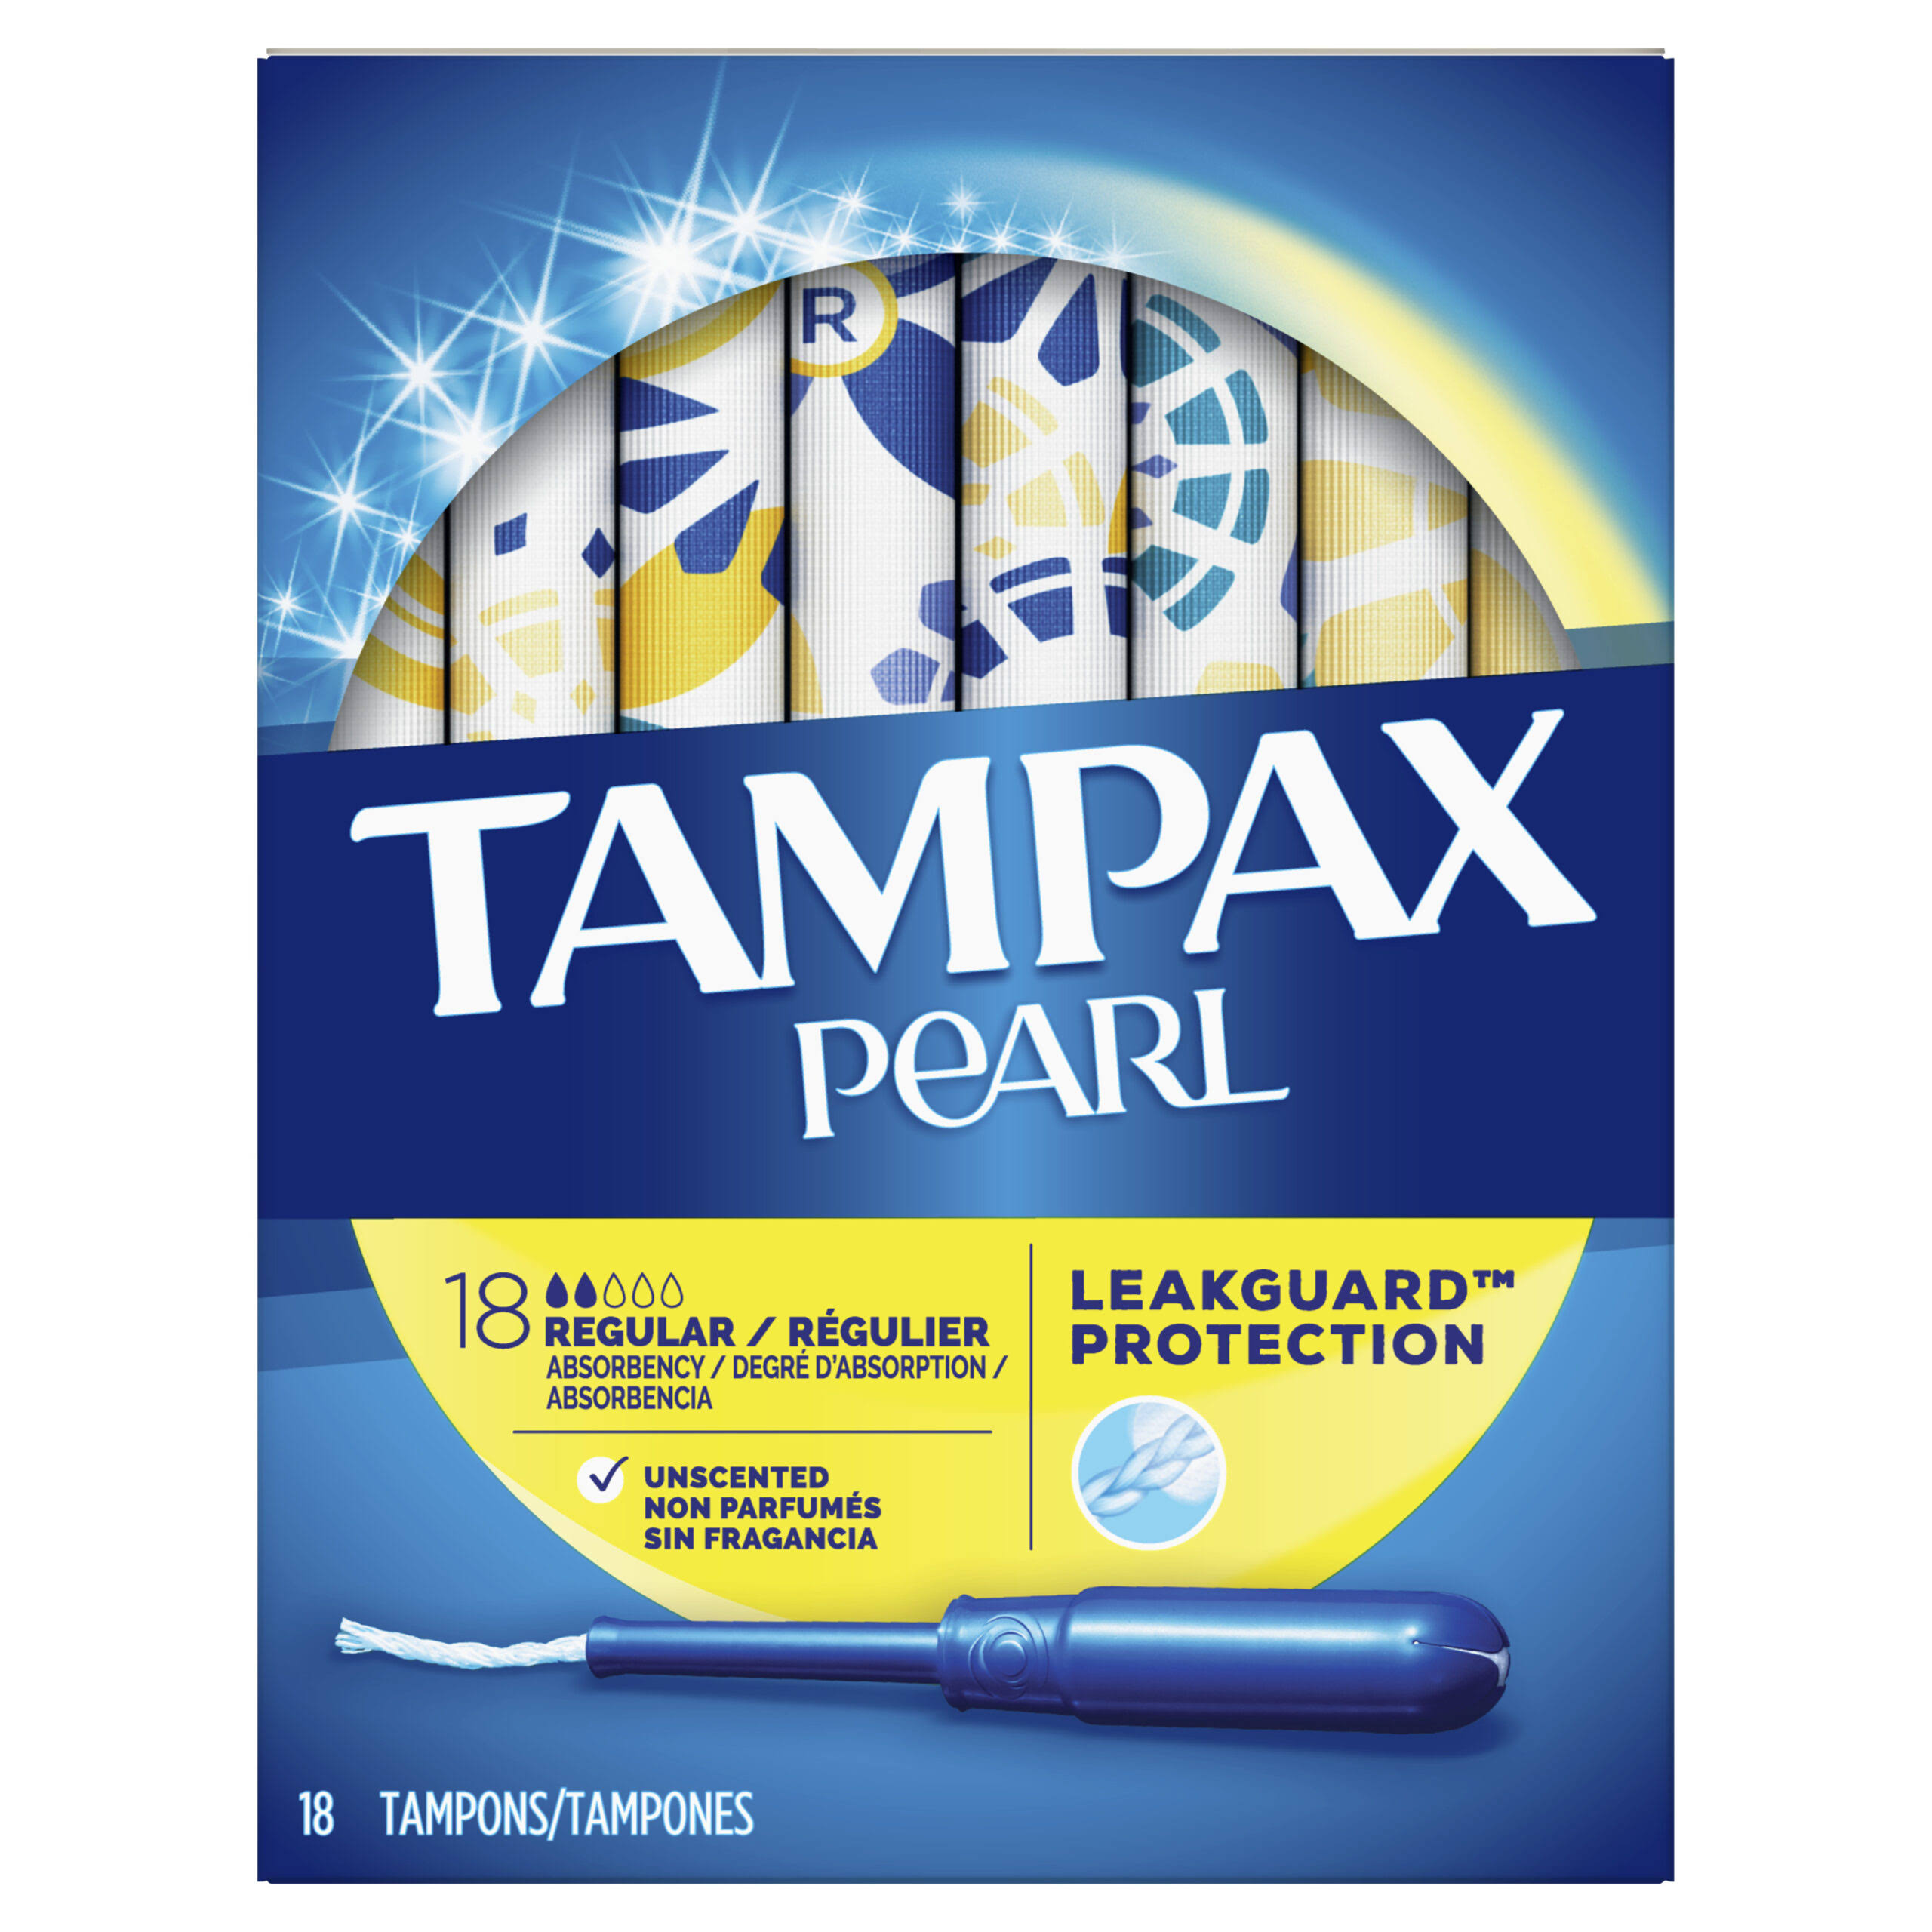 Tampax Pearl Plastic Unscented Tampons - Regular Absorbency, 18ct